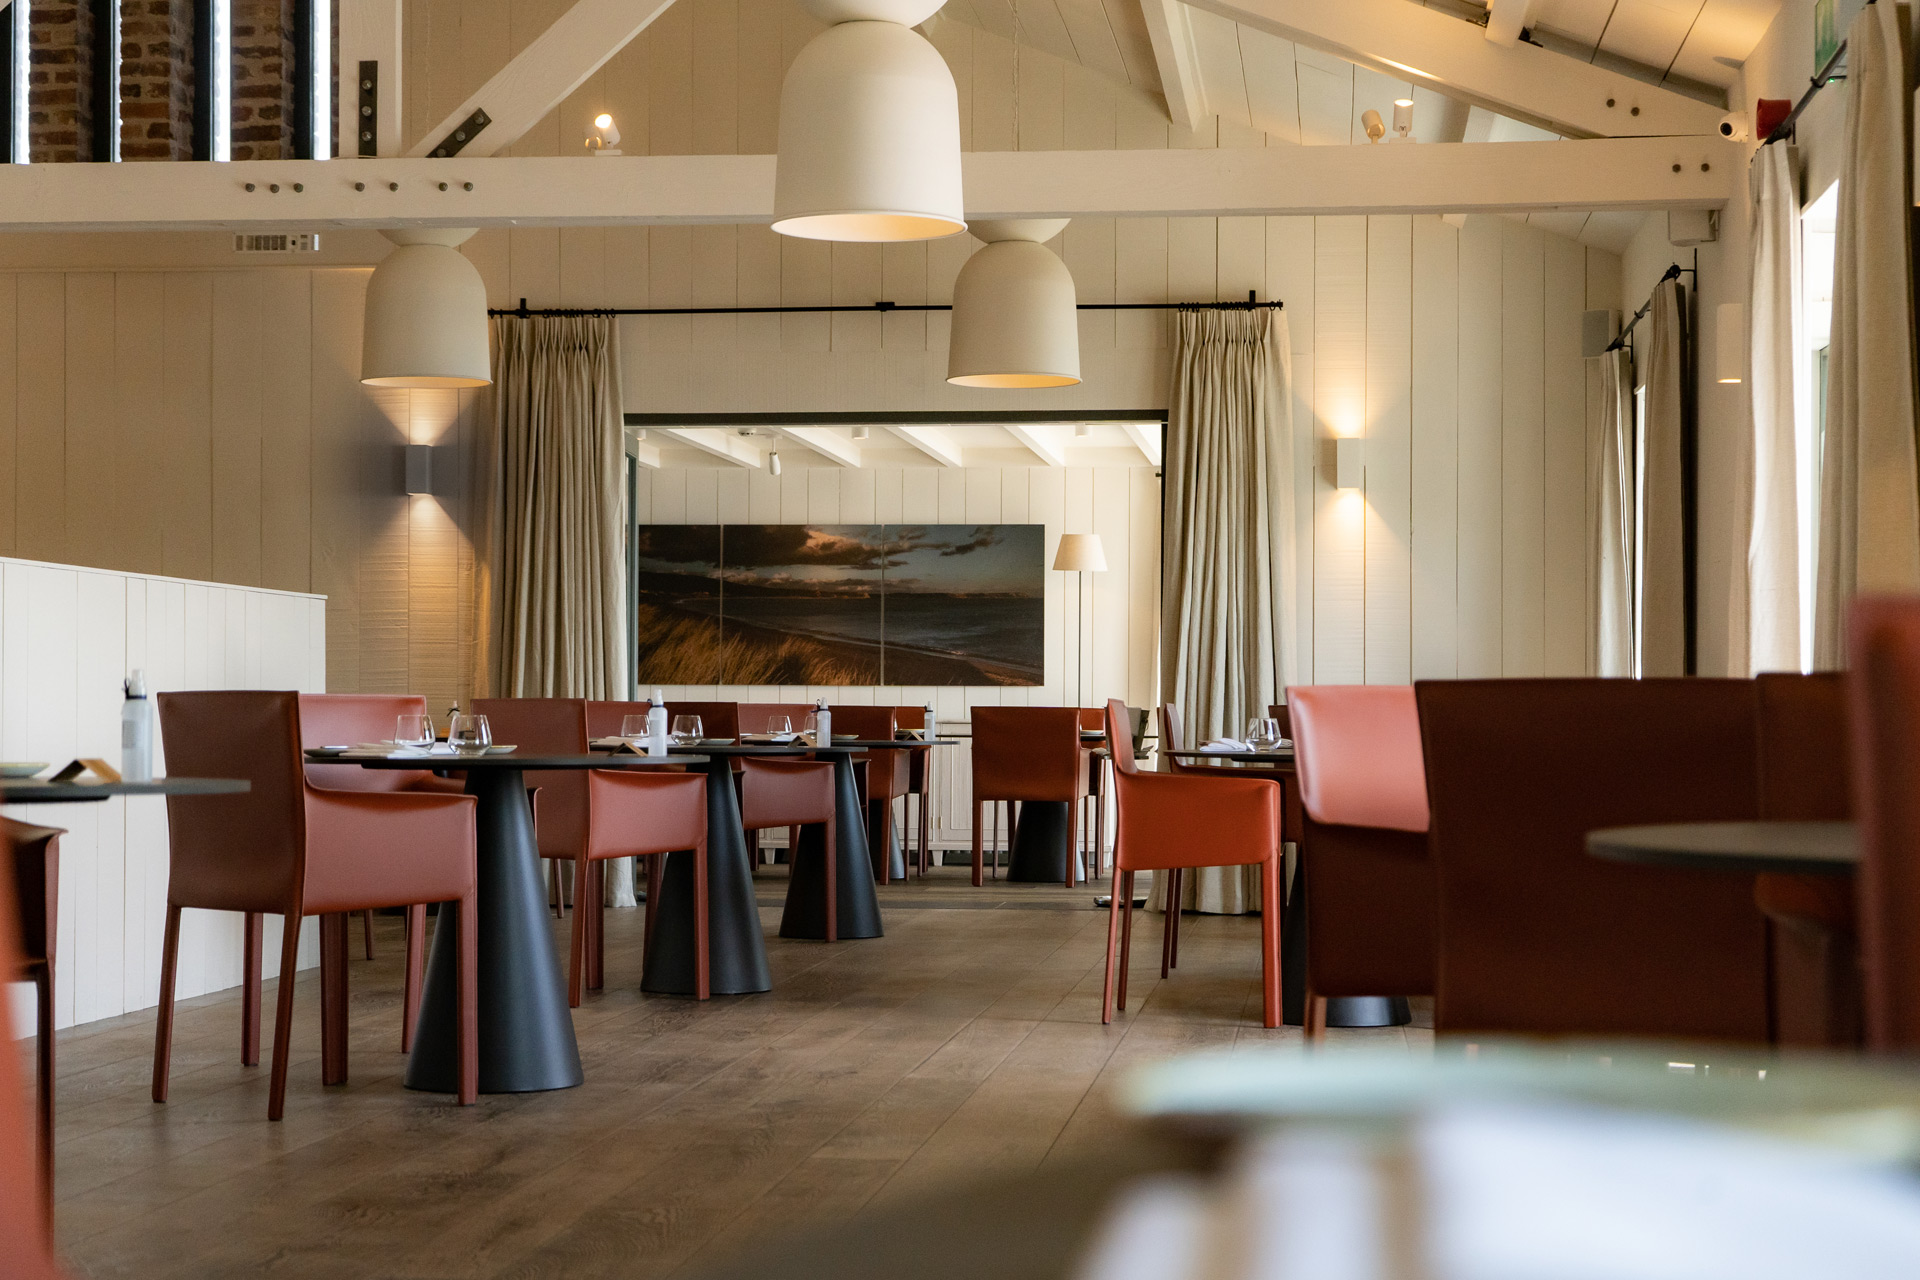 Interior of Beach House restaurant in Oxwich, with dark red chairs and vaulted ceilings